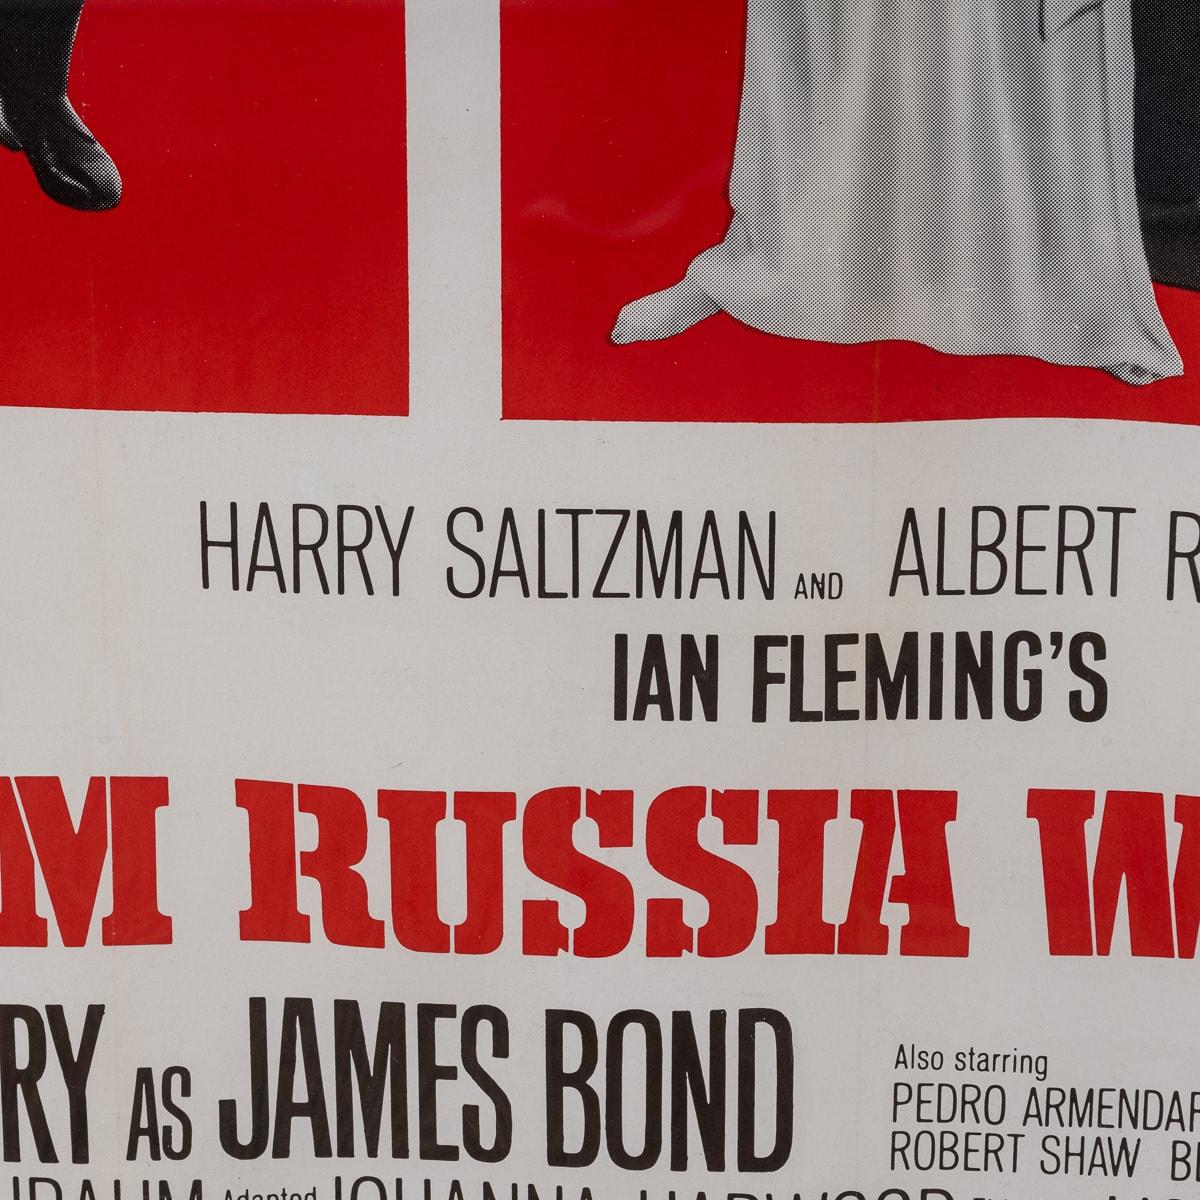 Original American (U.S) Release James Bond 'From Russia With Love' Poster c.1963 For Sale 13